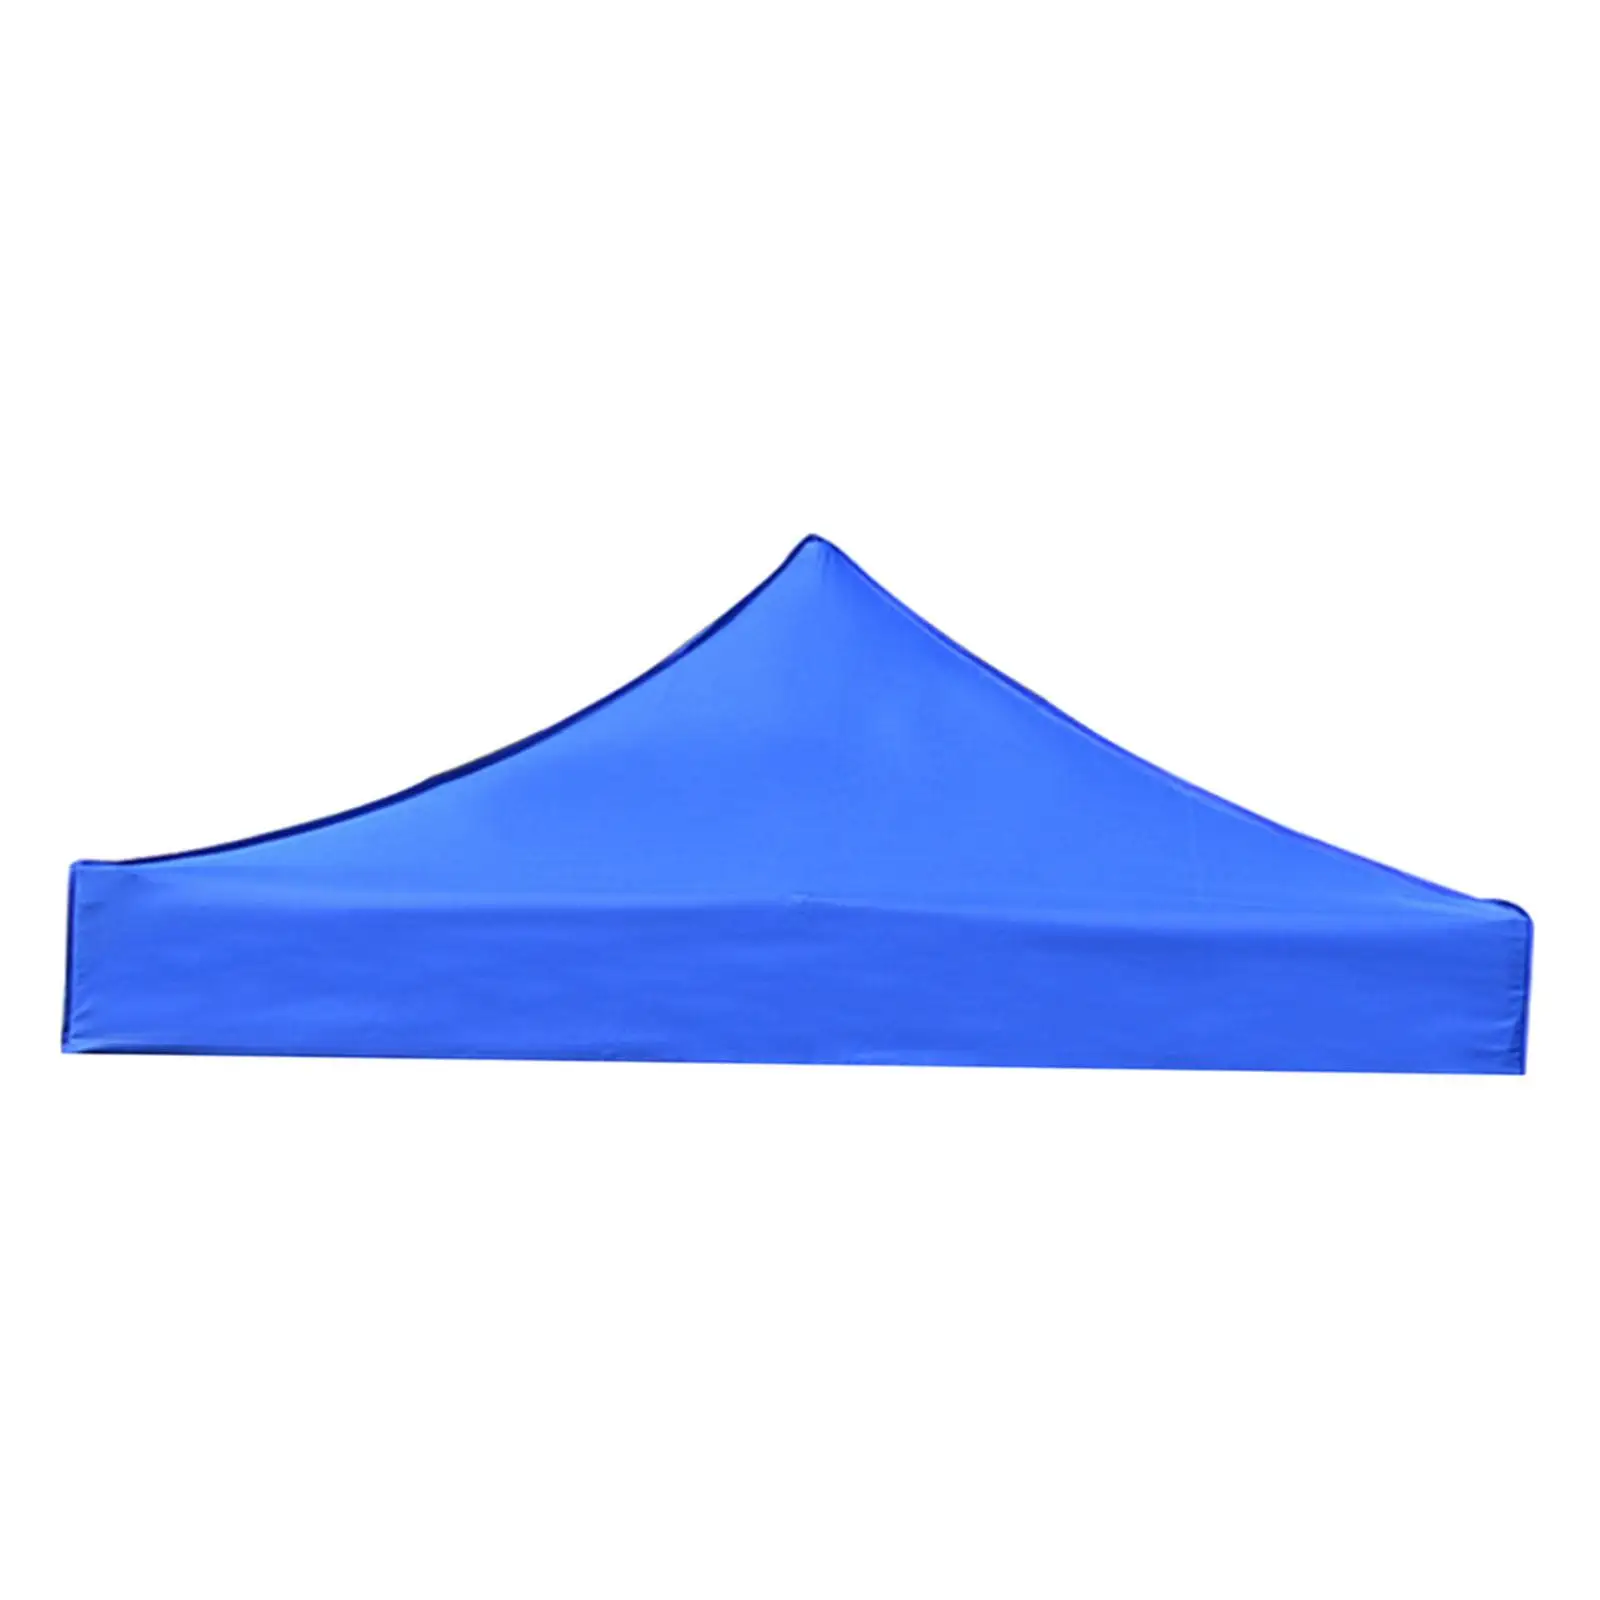 2.9MX2.9M Canopy Replacement Roof Cover Rainproof for Camping Hiking